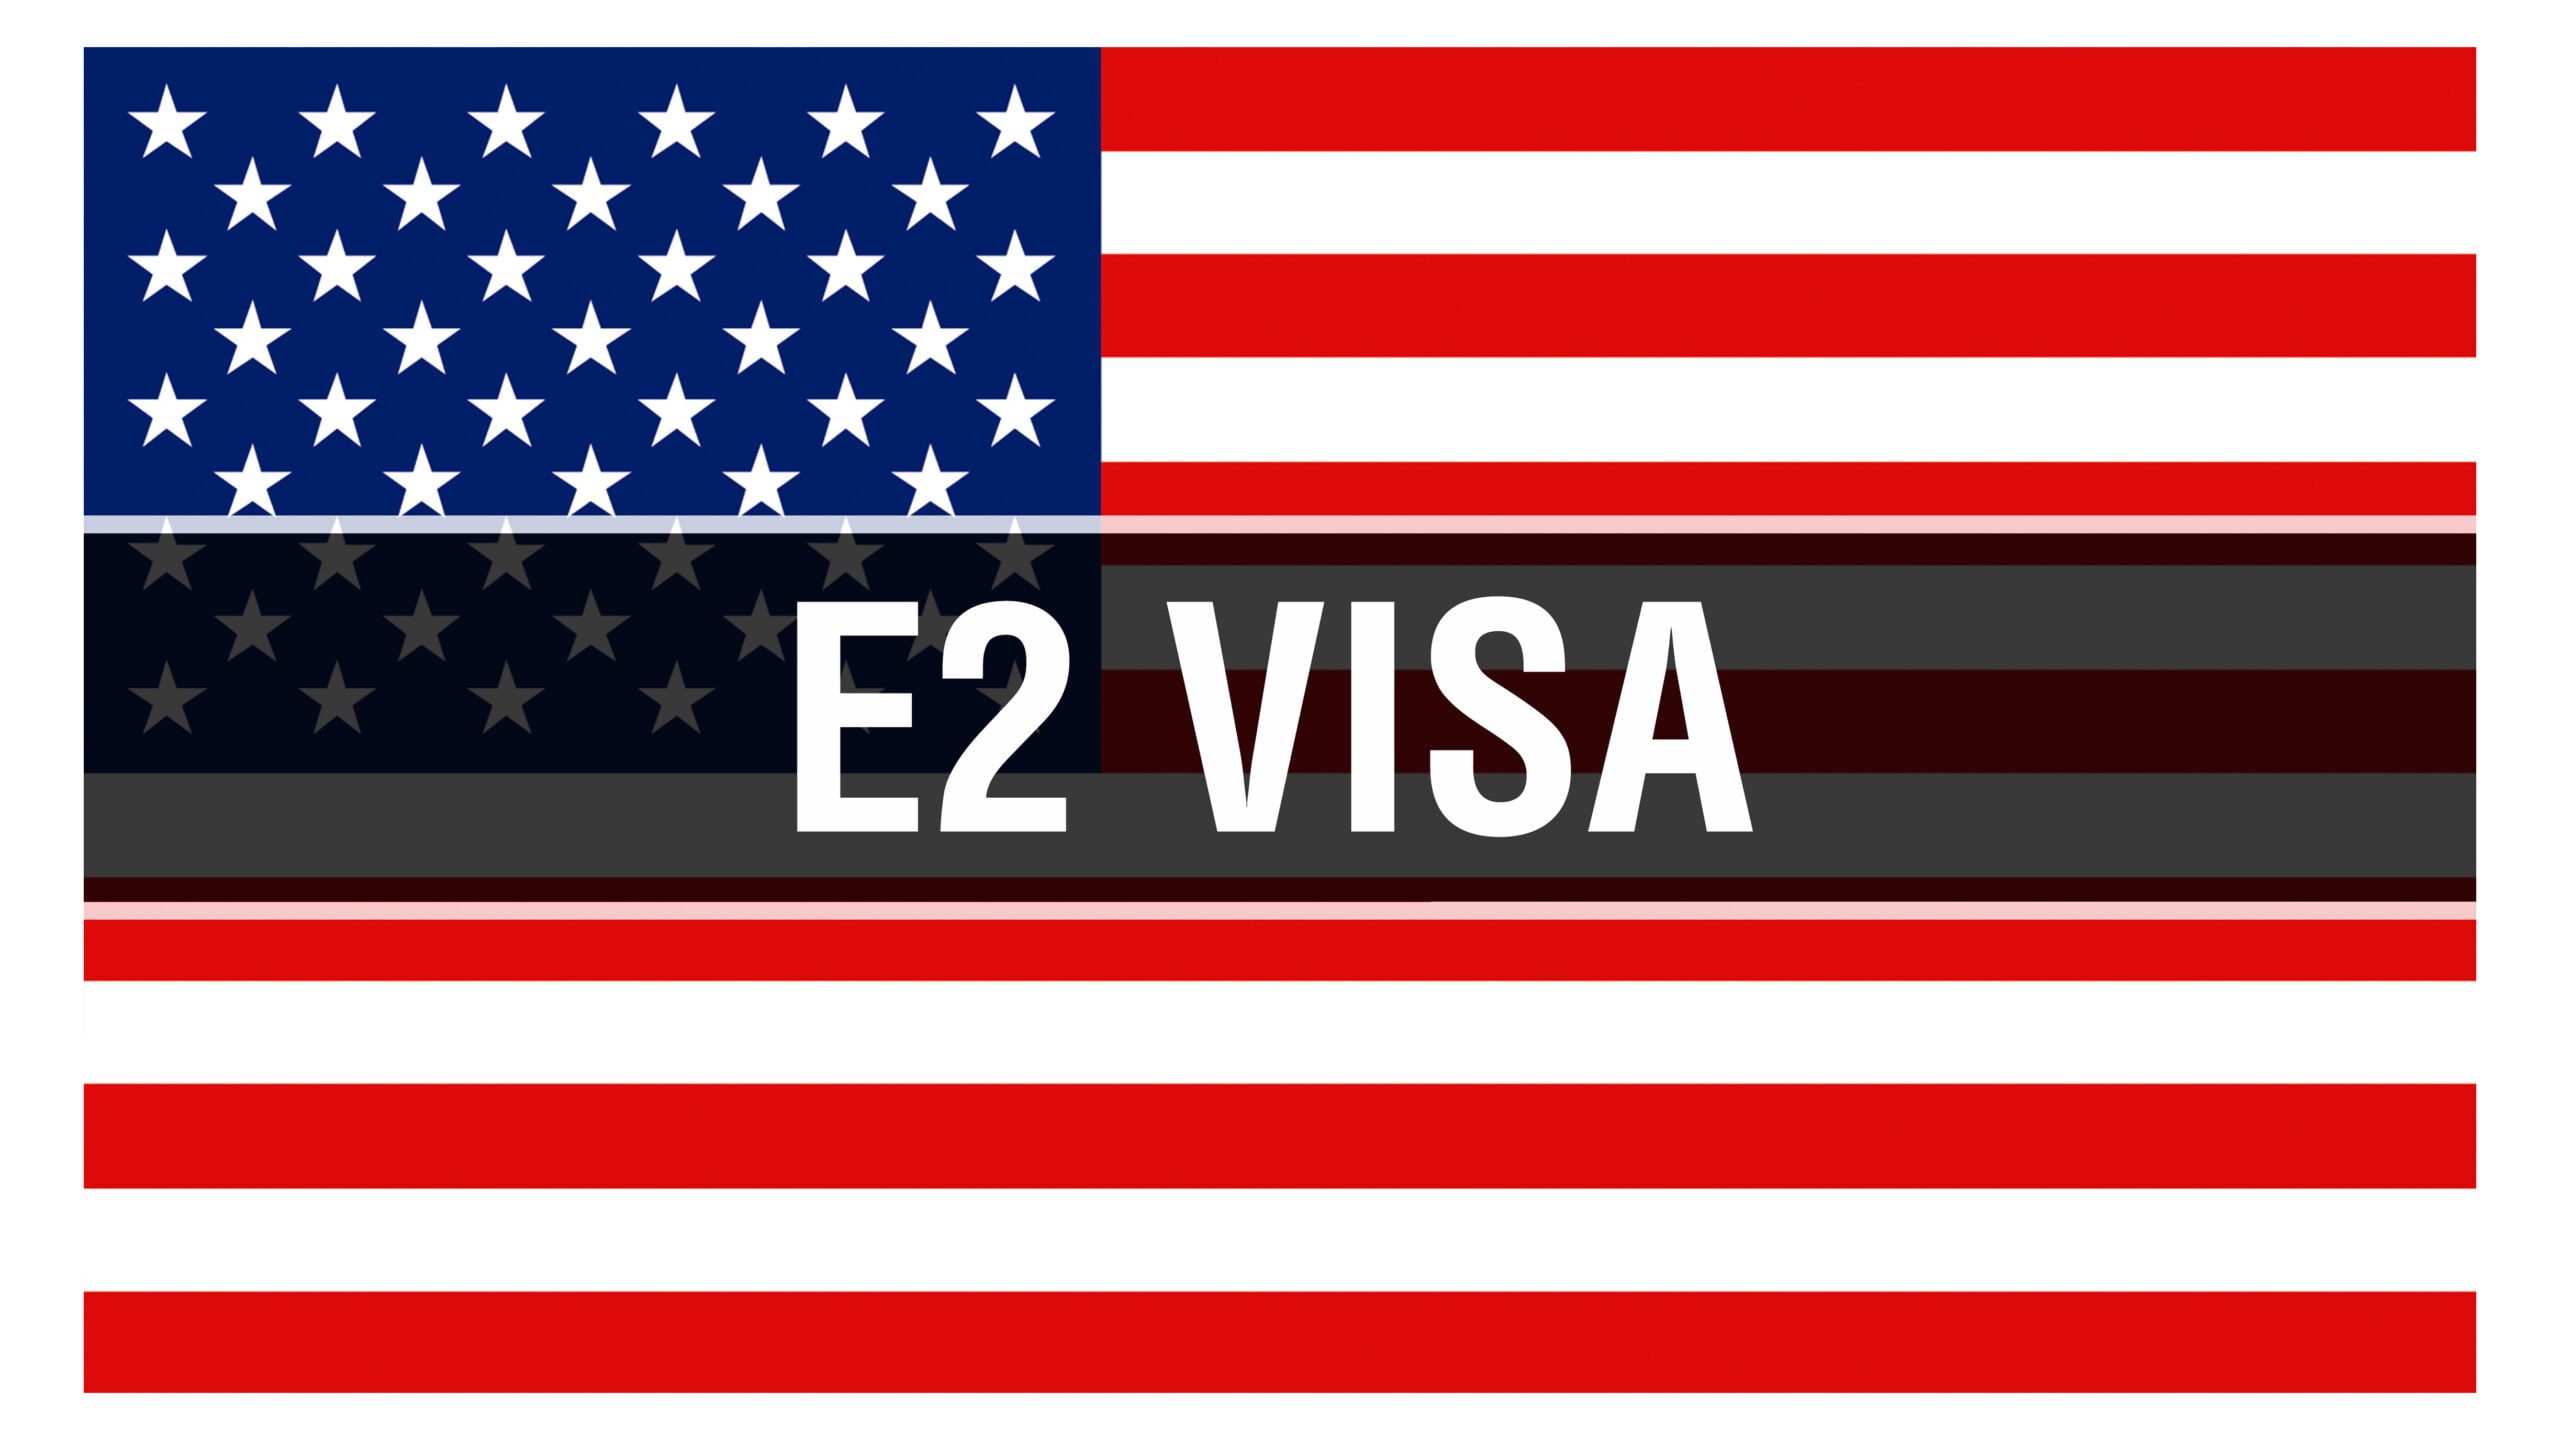 Top reasons for an E-2 visa investment